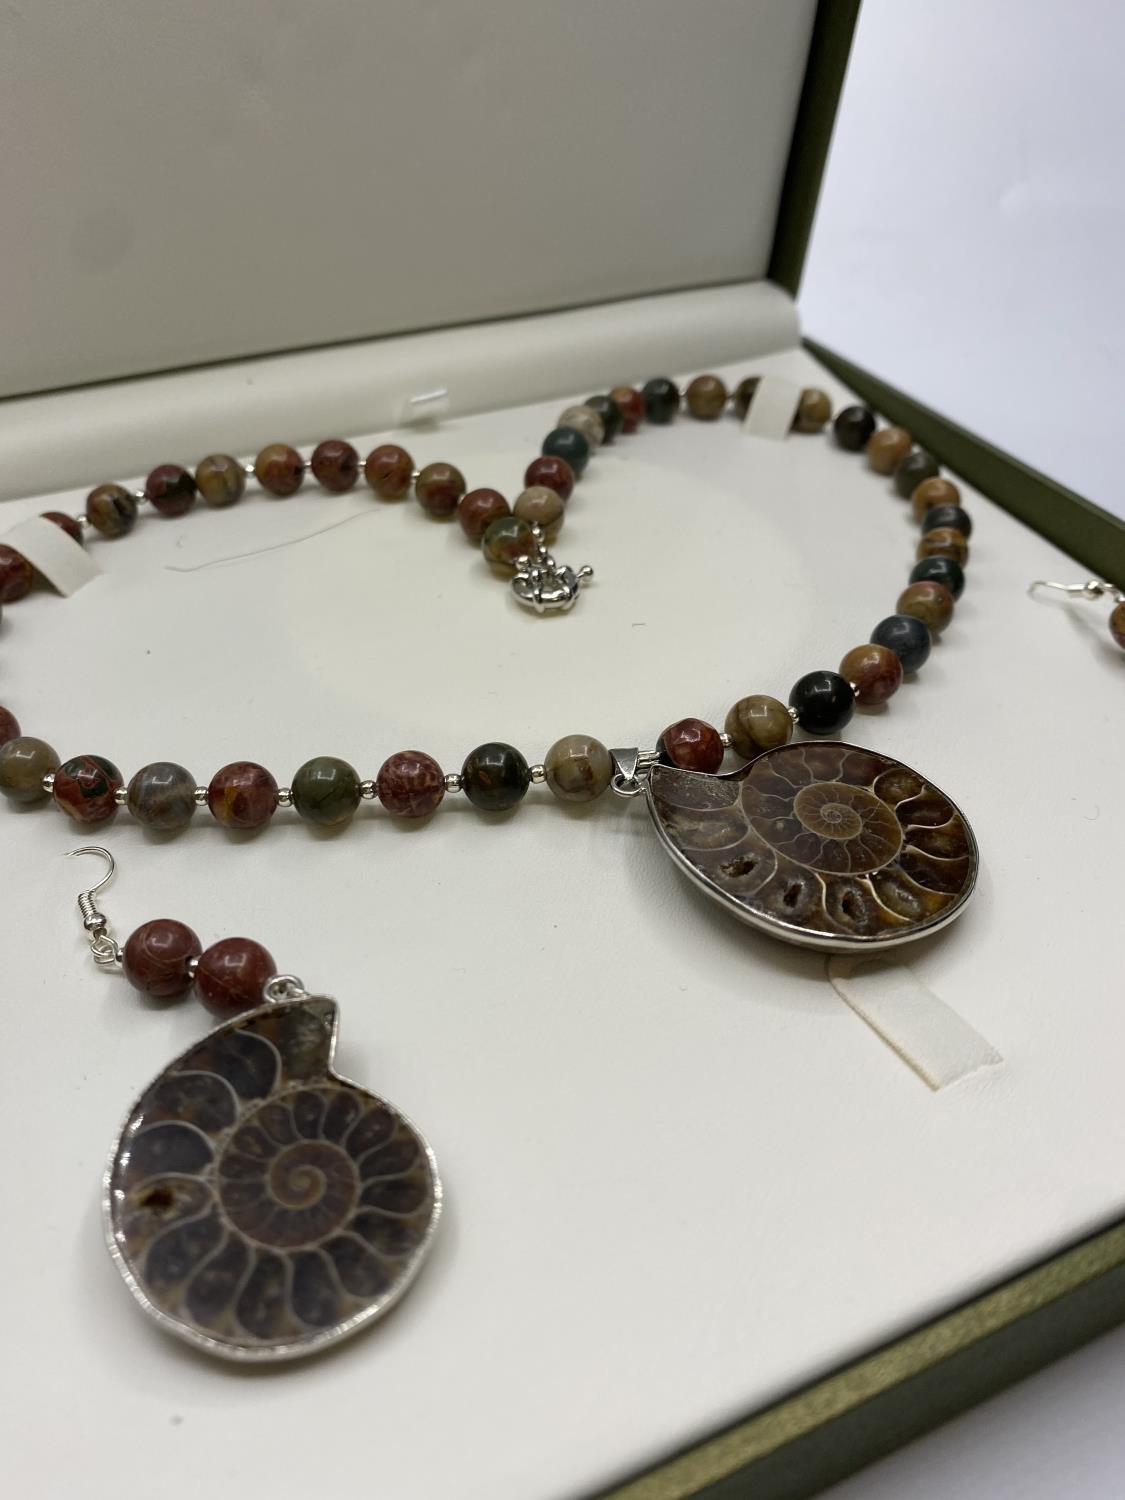 A jasper and Jurassic Fossil Ammonites (163 million years old) necklace and matching earrings from - Image 2 of 5